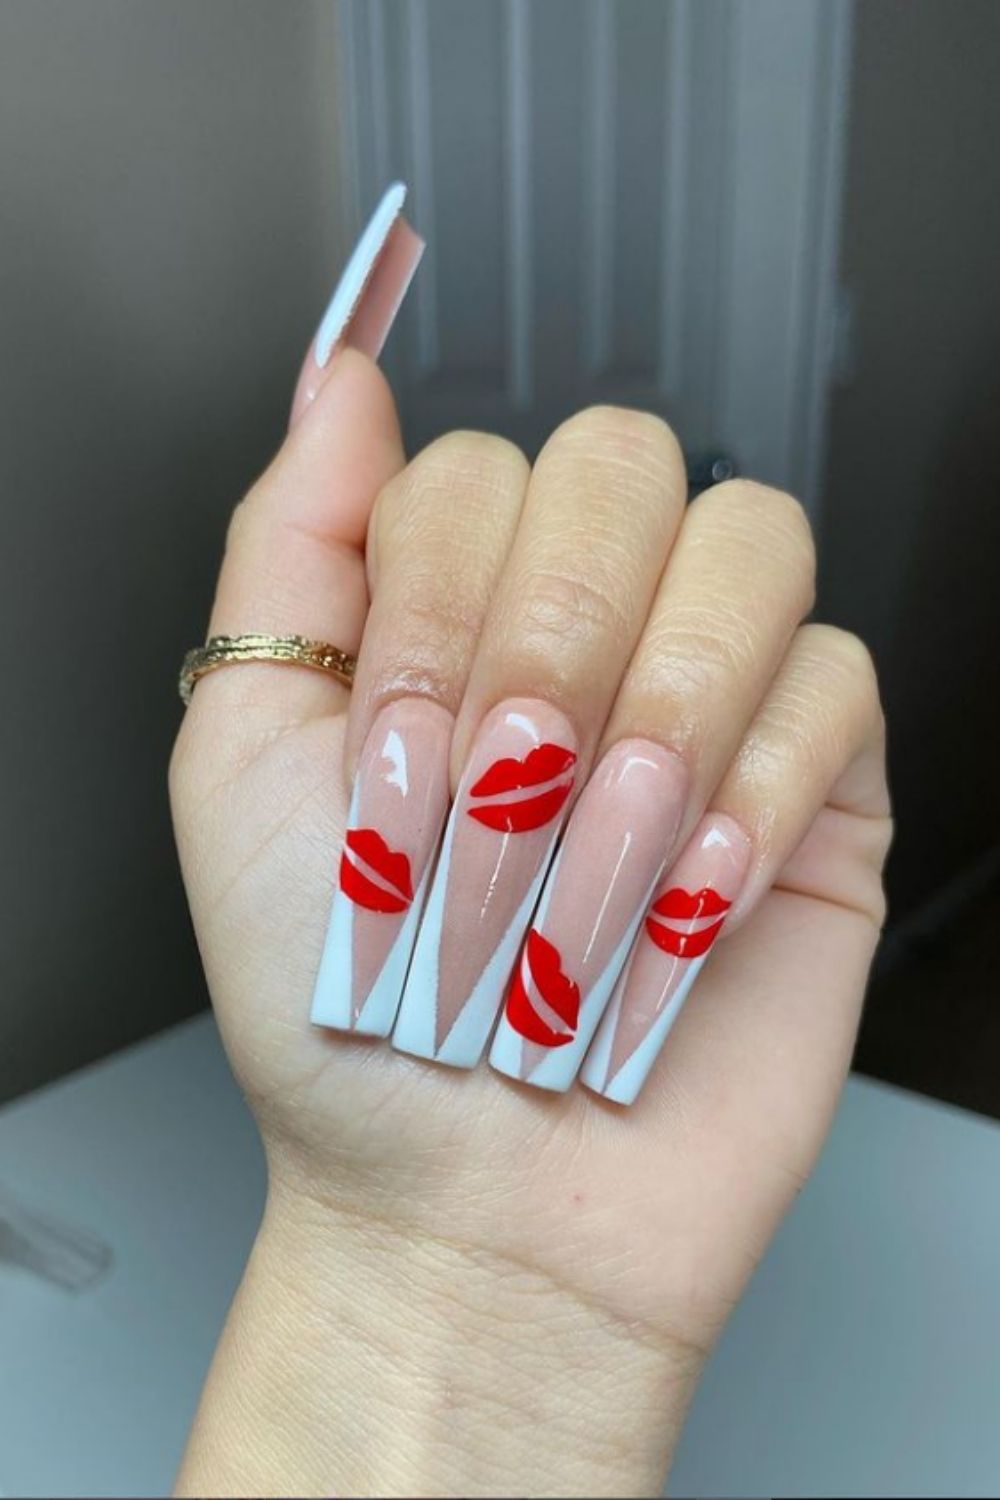 French nails art with red lip